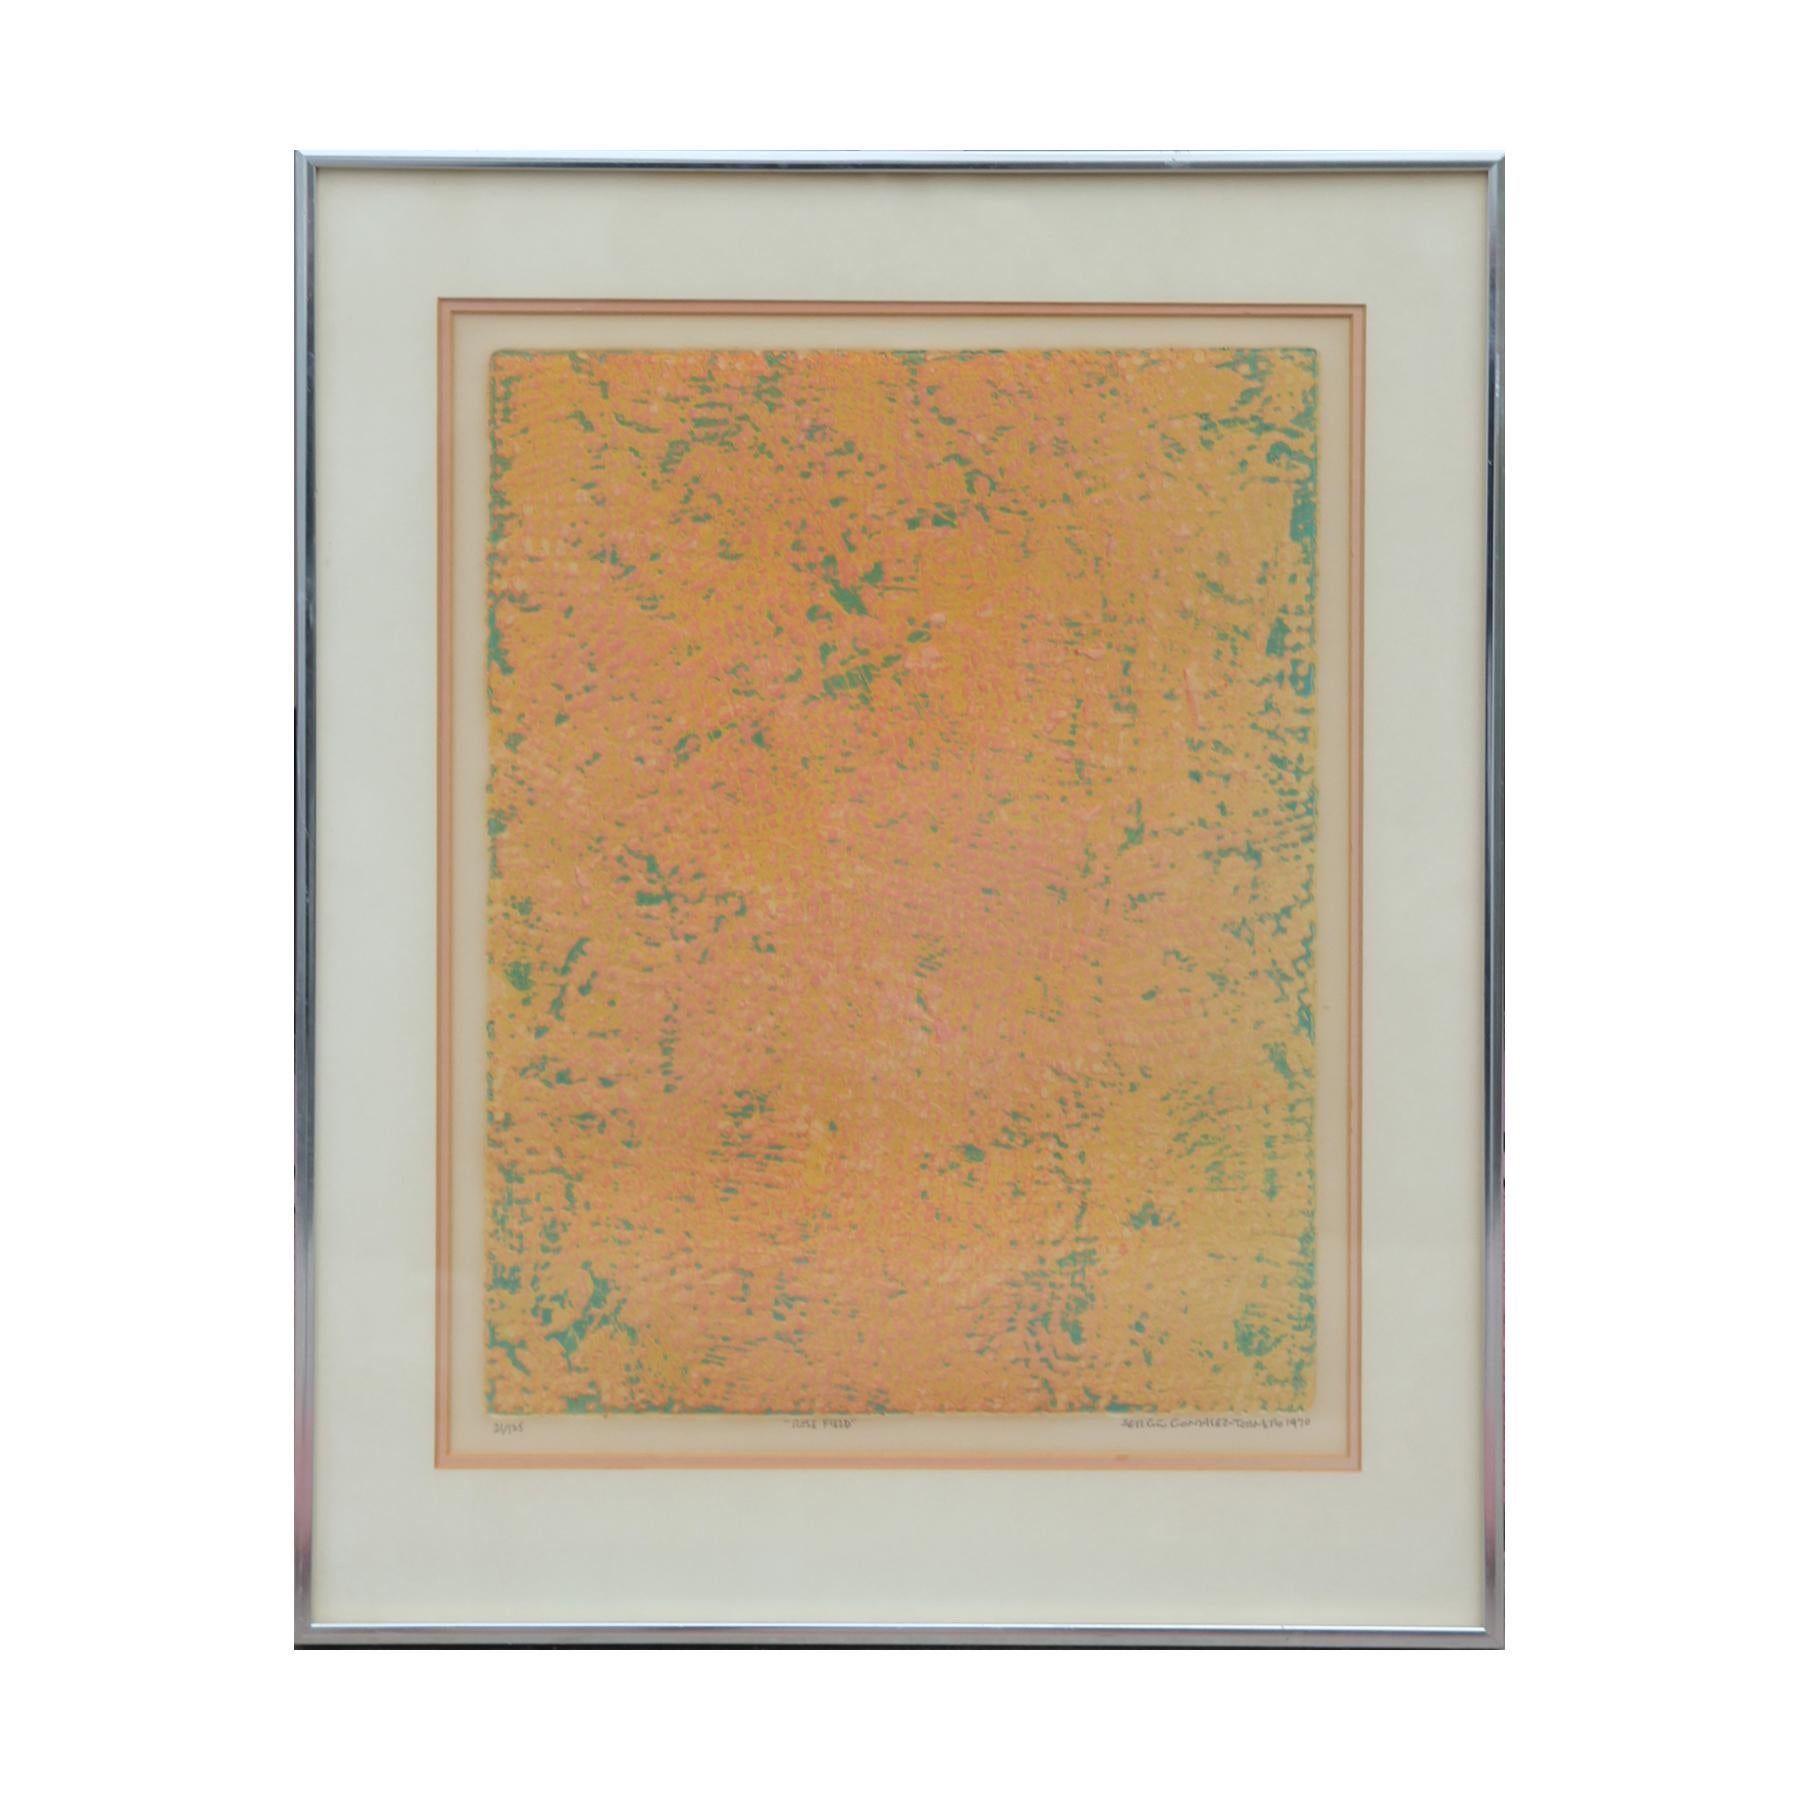 Sergio Gonzalez Tornero Abstract Print - “Rose Field” Orange and Green Abstract Etching Print